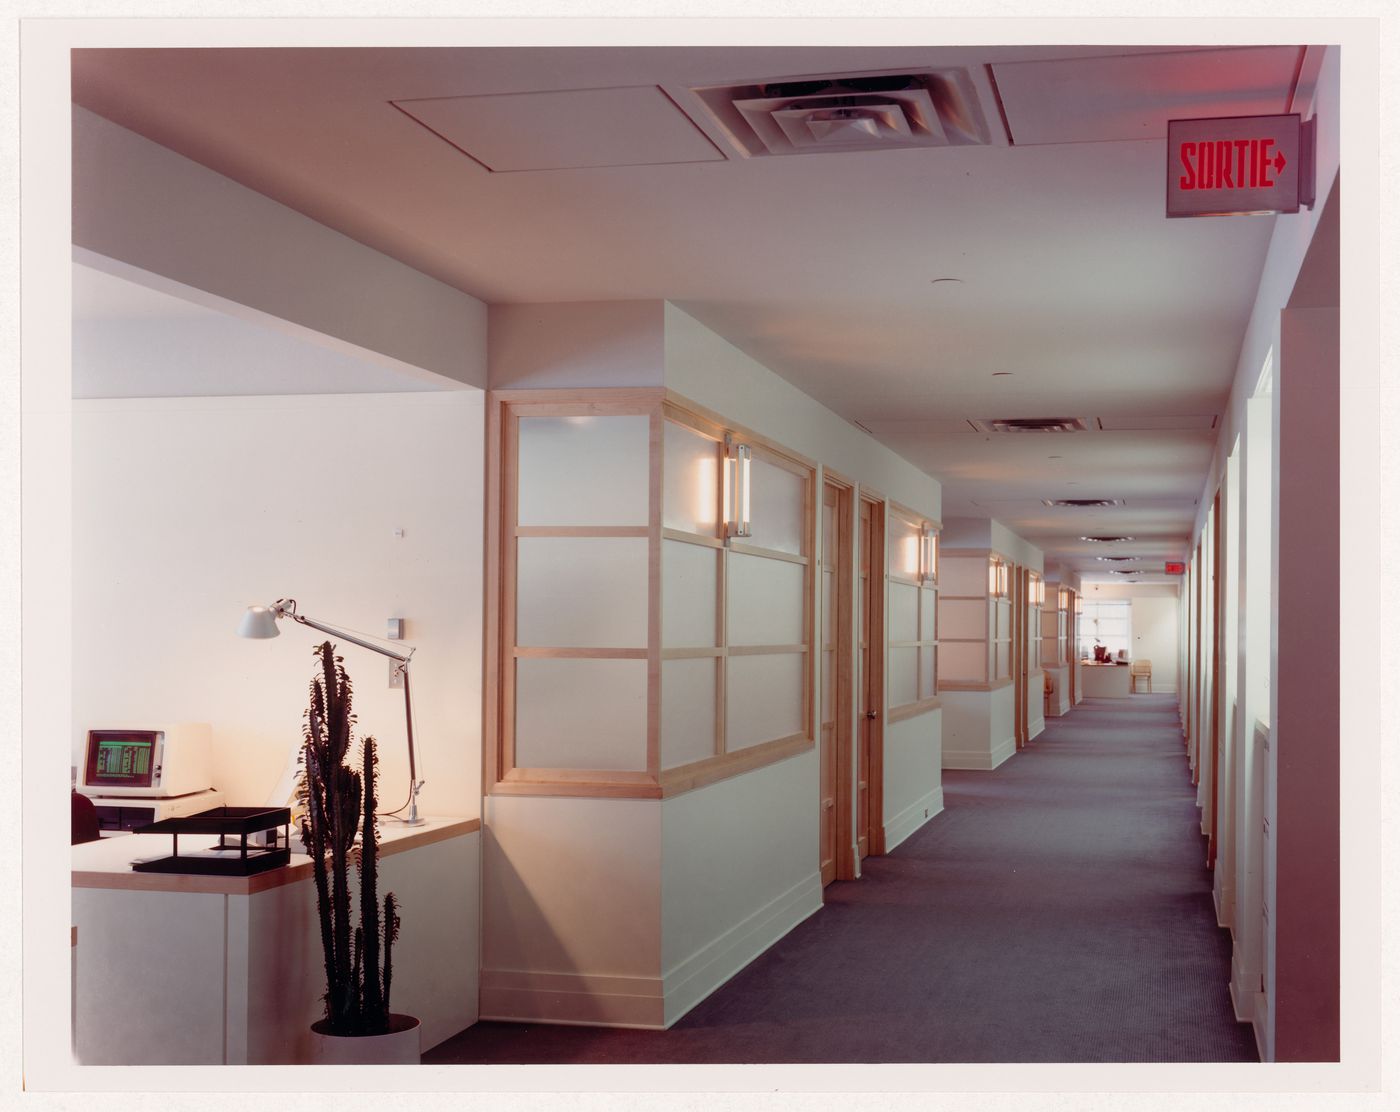 Interior view of the corridor and offices on the curatorial level, Canadian Centre for Architecture, Montréal, Québec